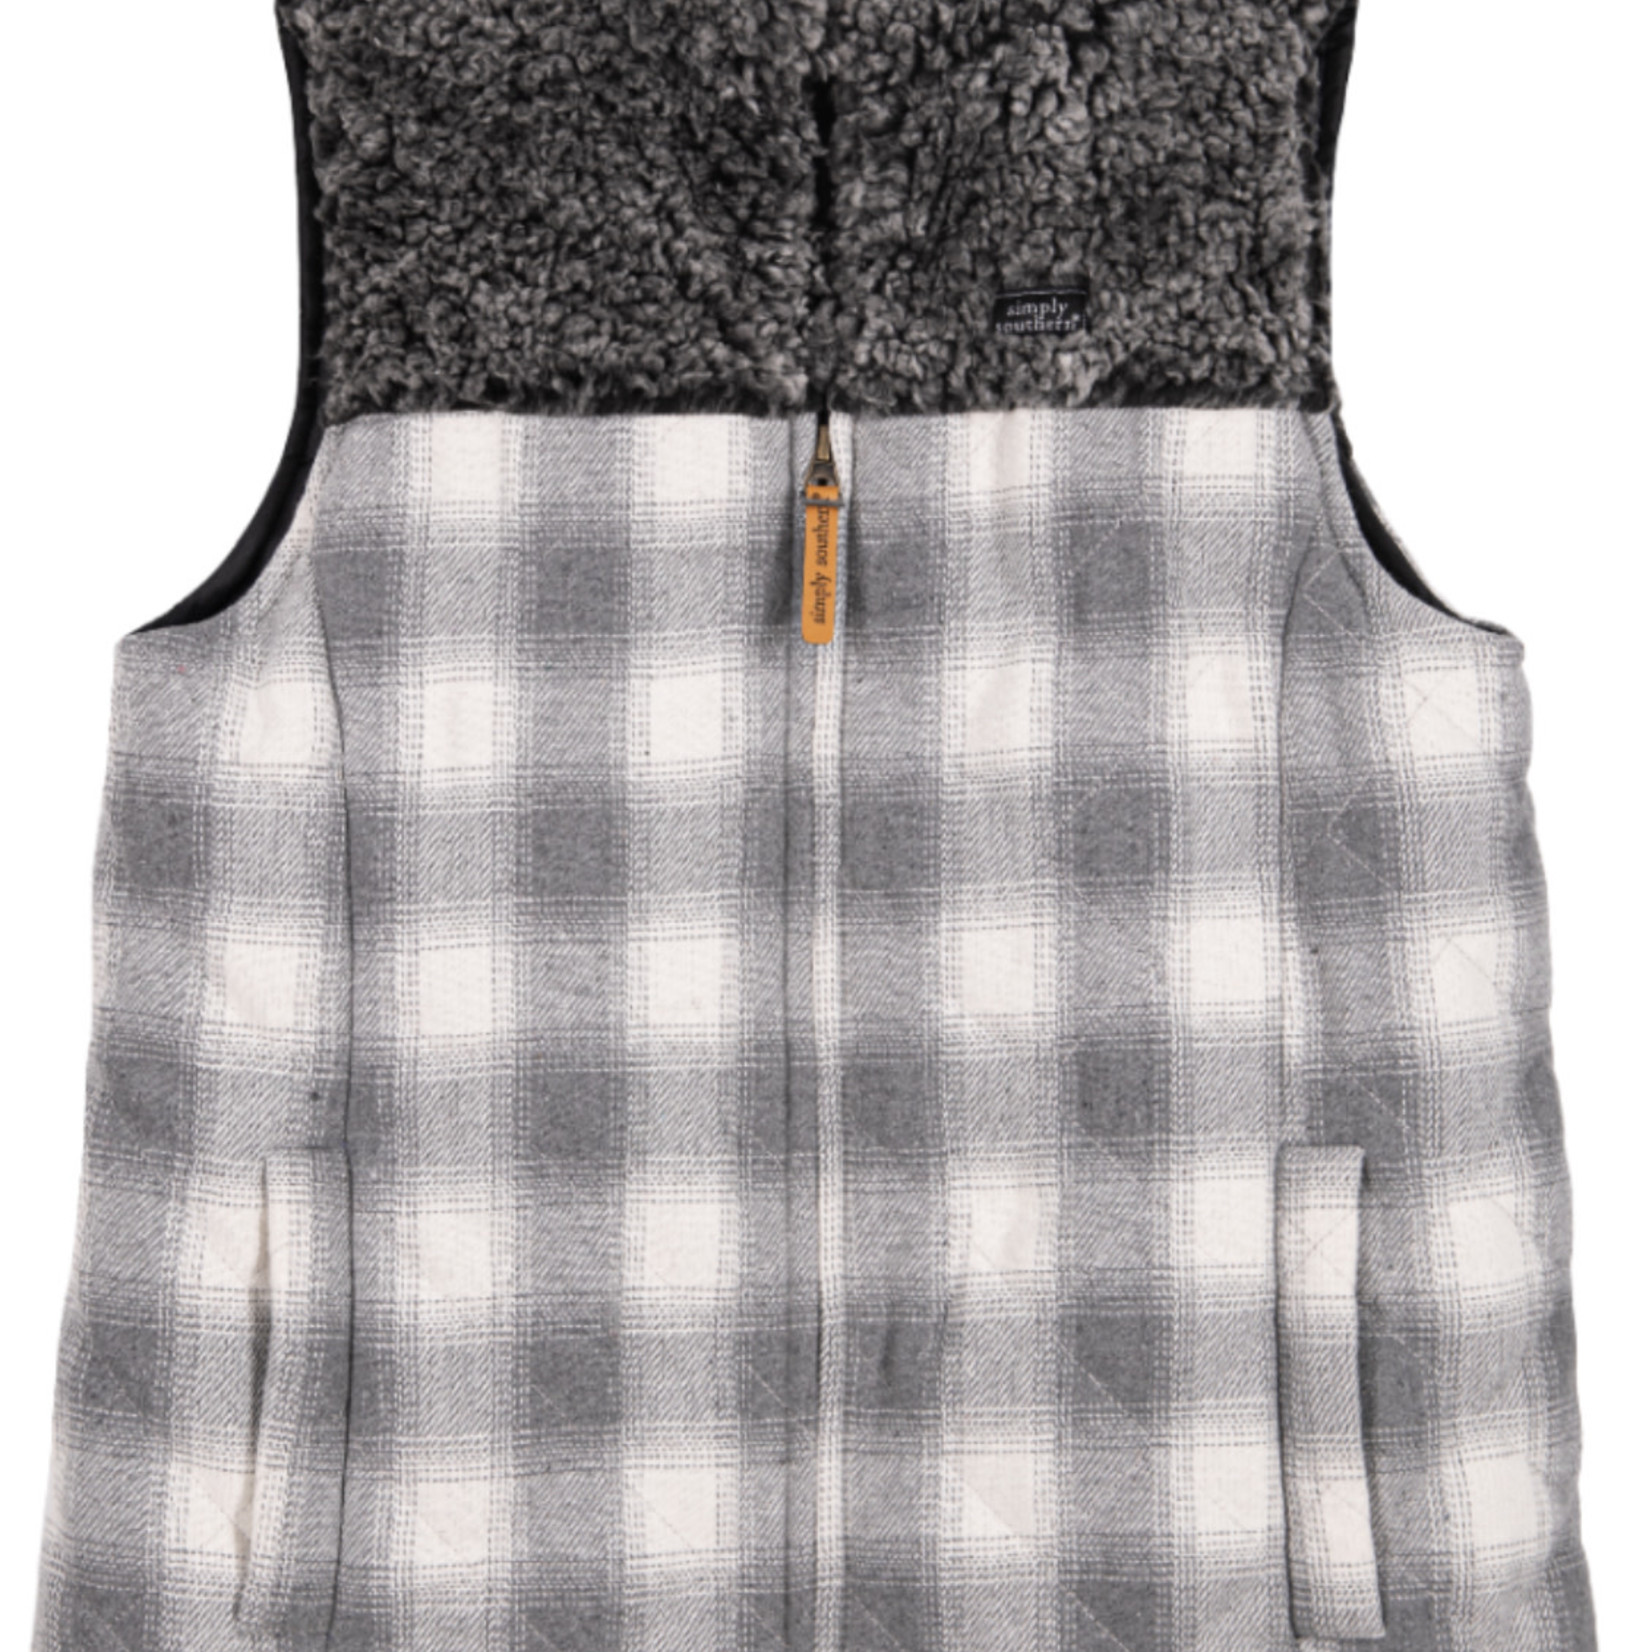 Simply Southern Lumber Jill Vest Plaid Gray - A Gathering Place